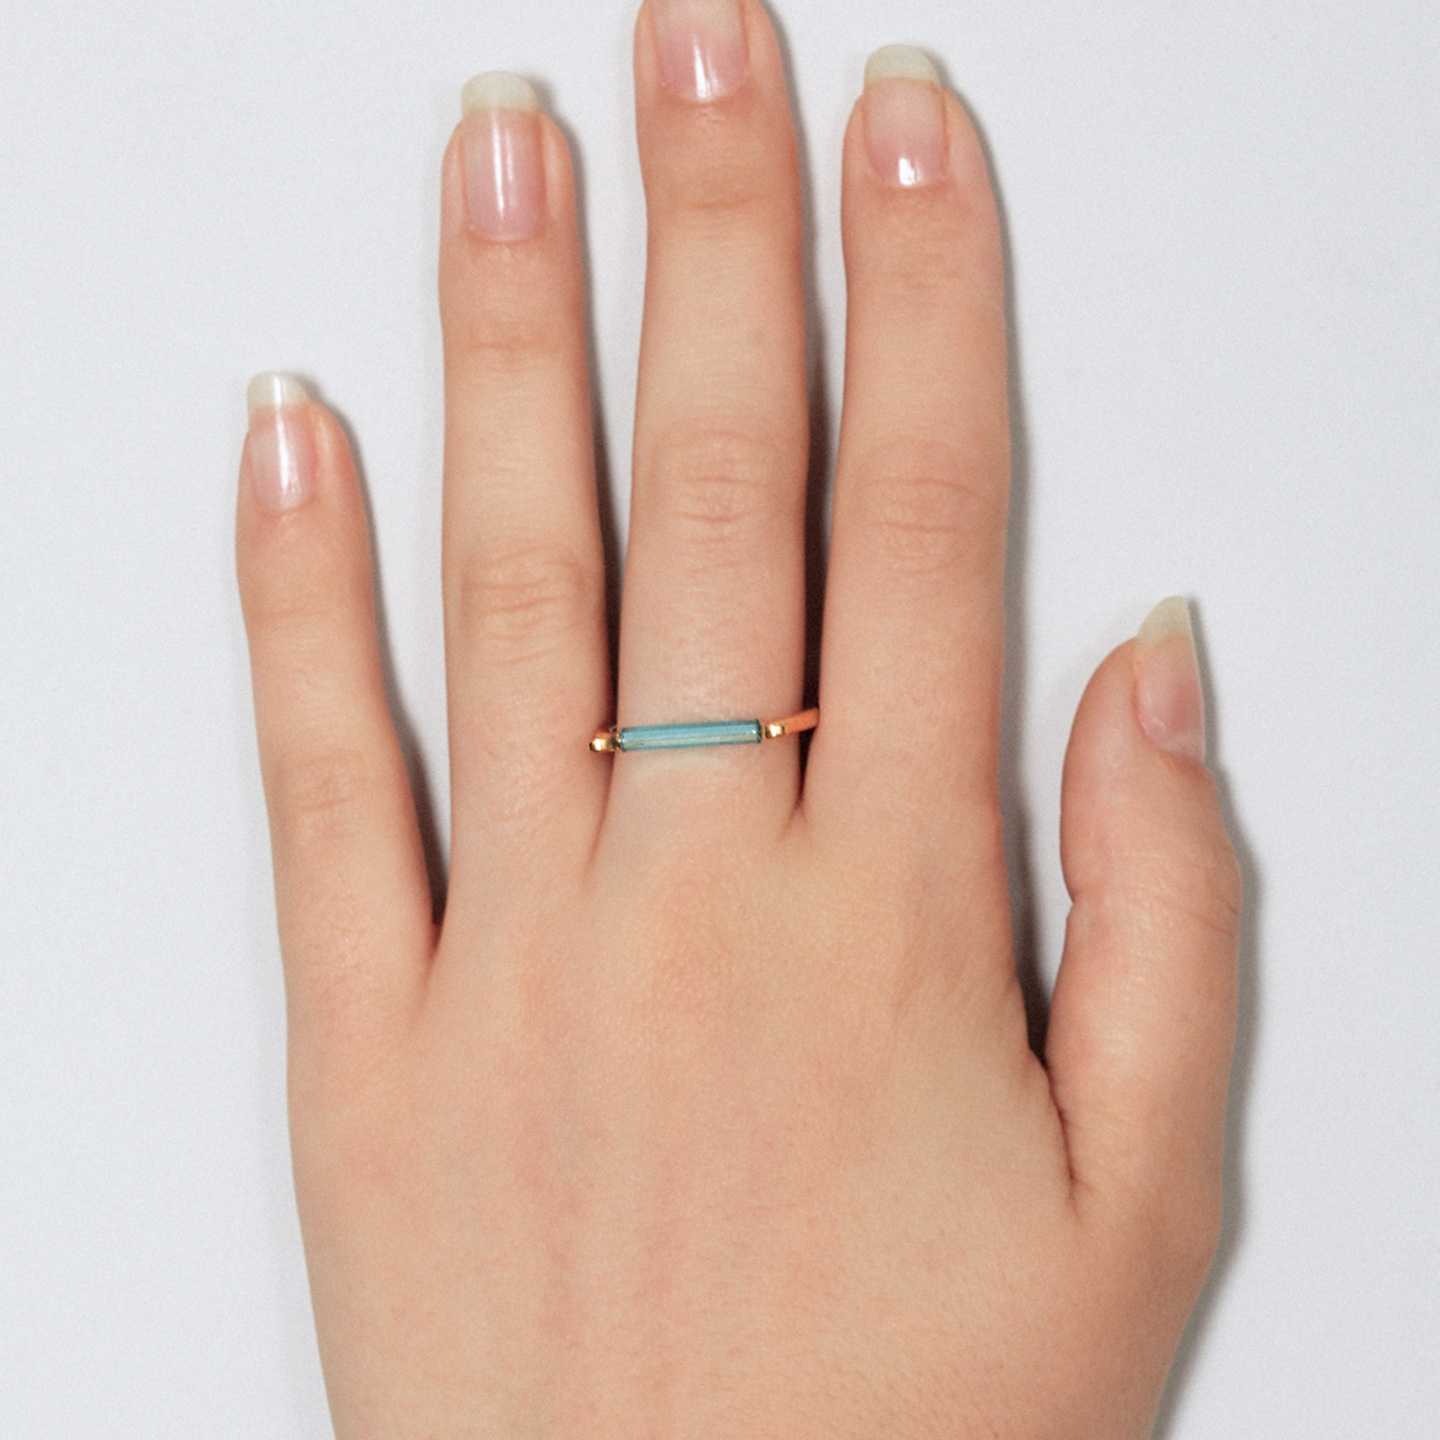 Gold ring with minimalist neon blue bar